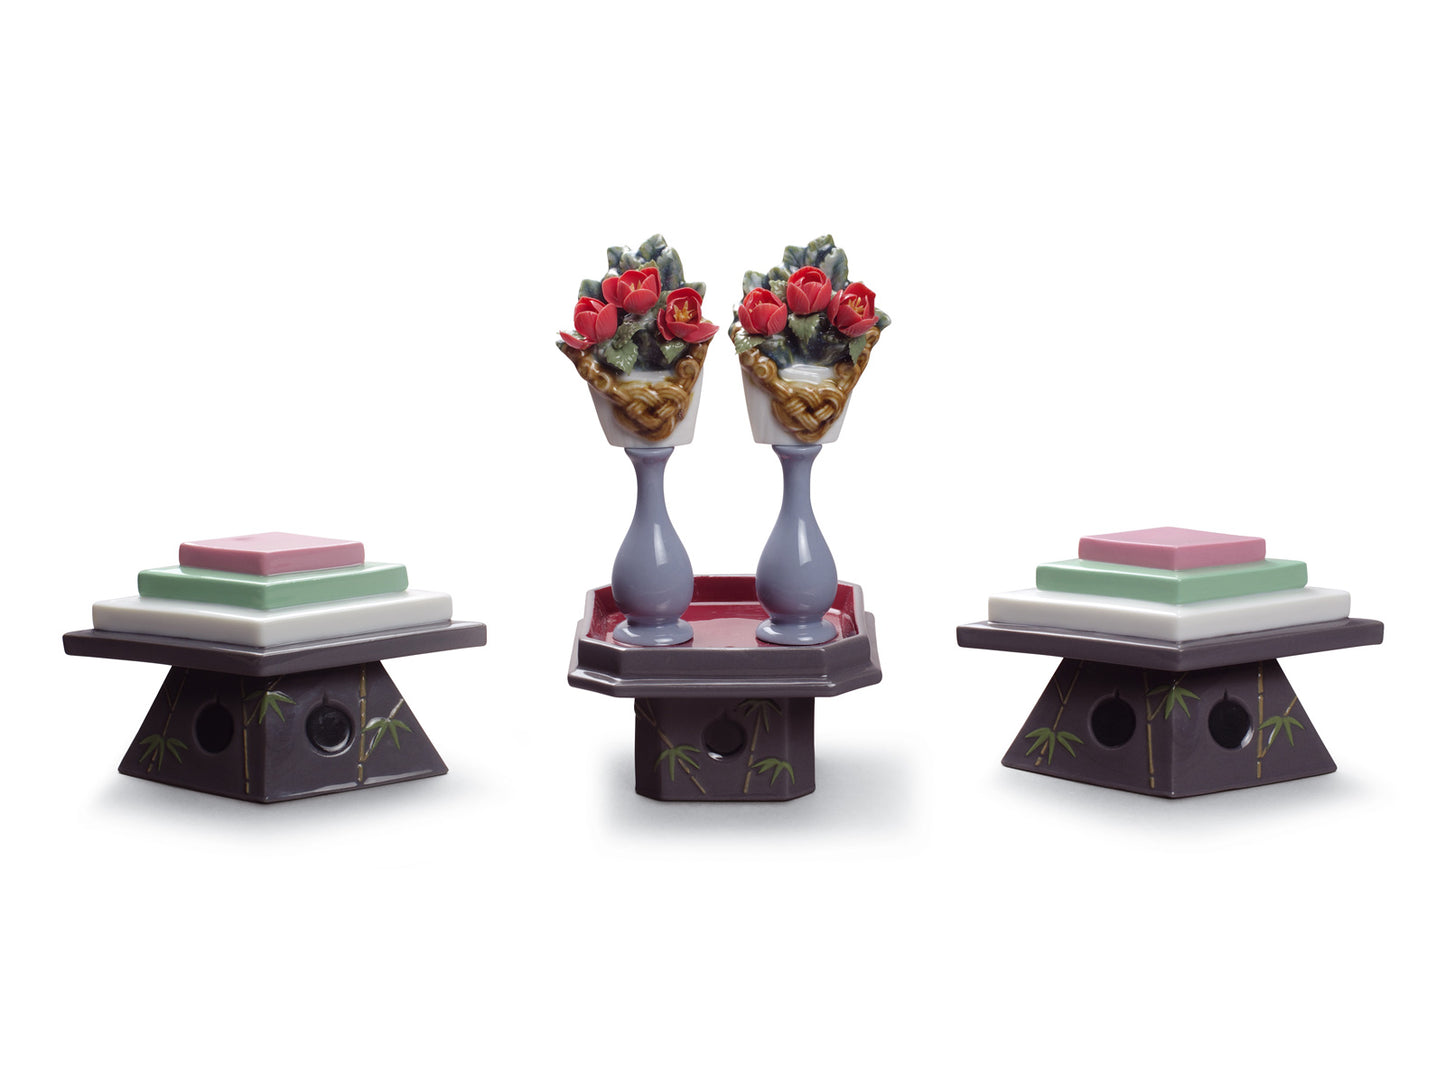 Lladro Tables For Sweets and Peach Flowers